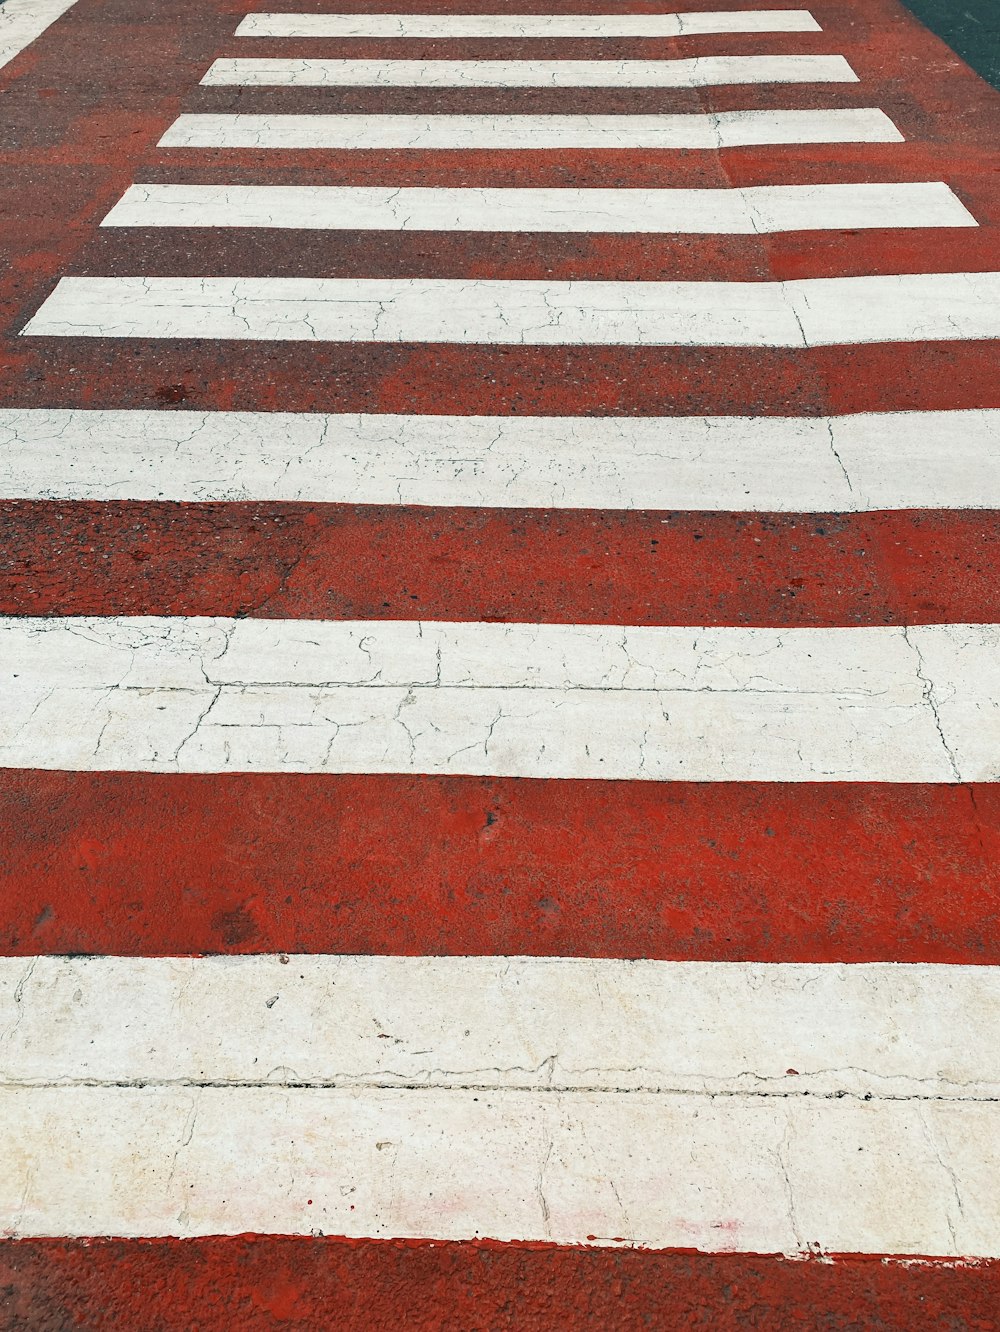 a red and white crosswalk on a street